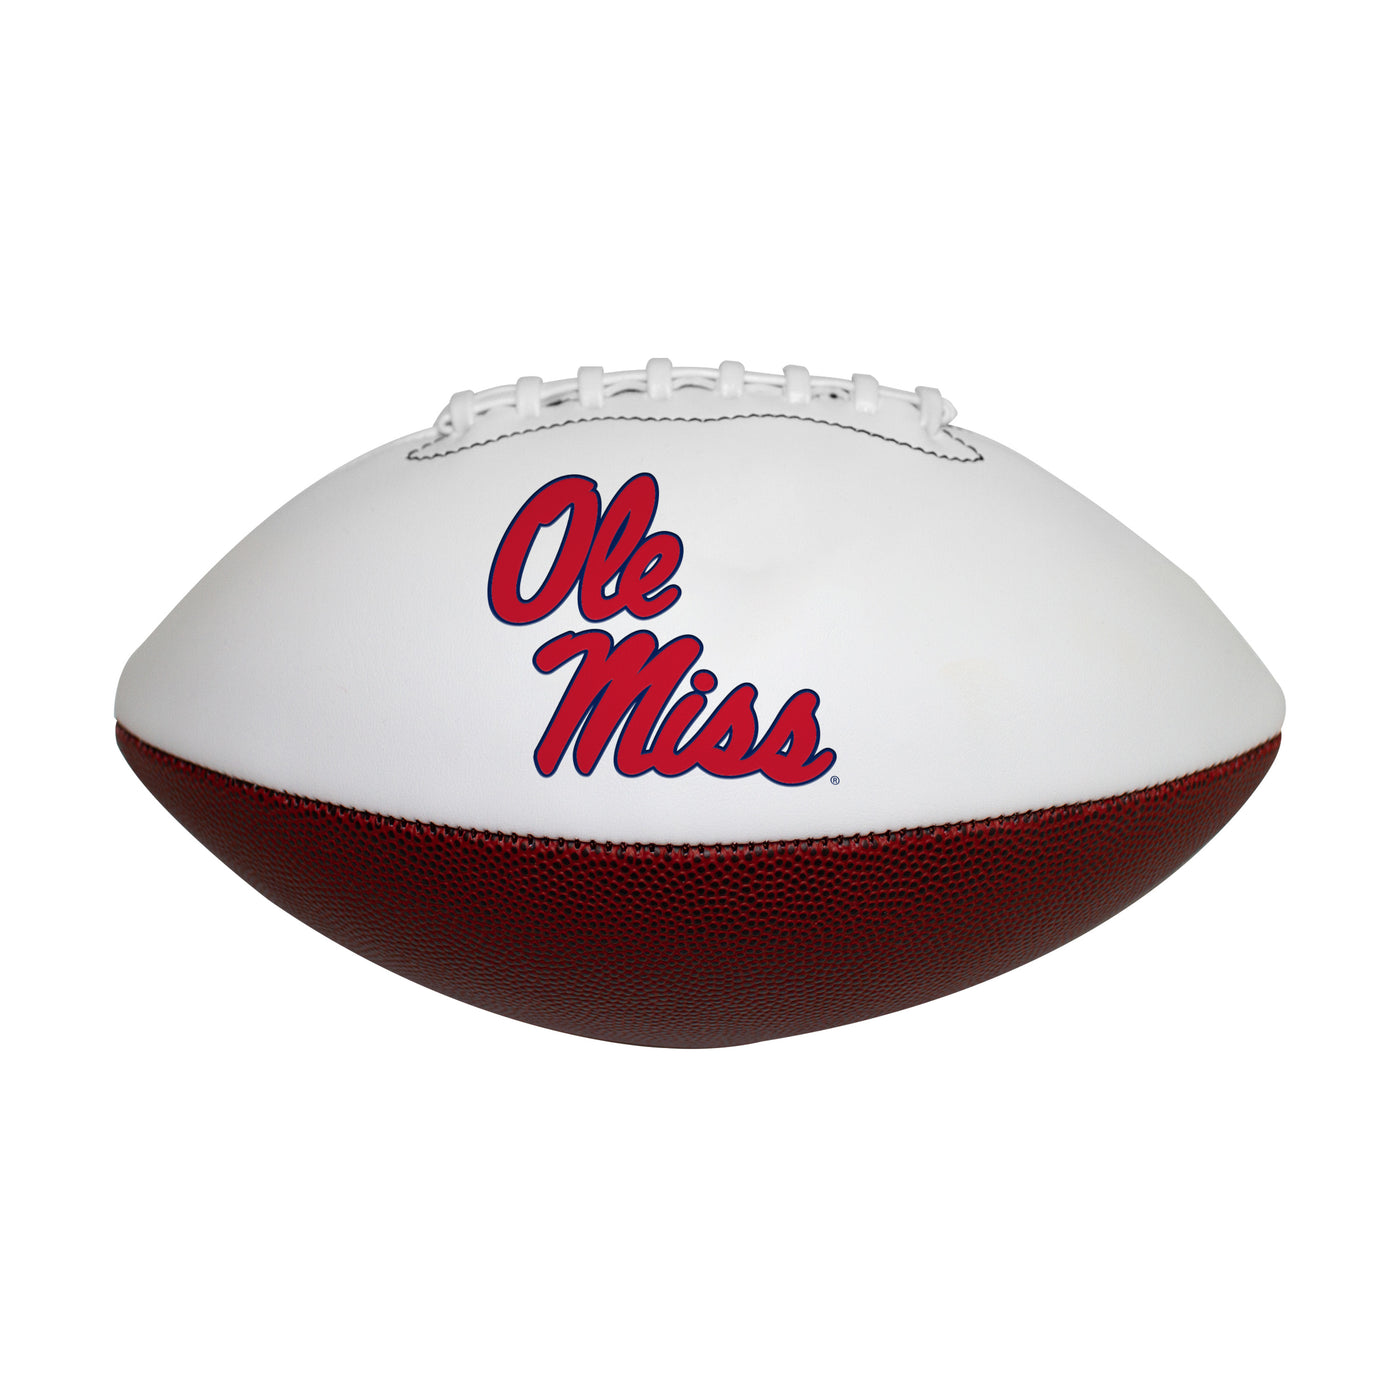 Ole Miss Official-Size Autograph Football